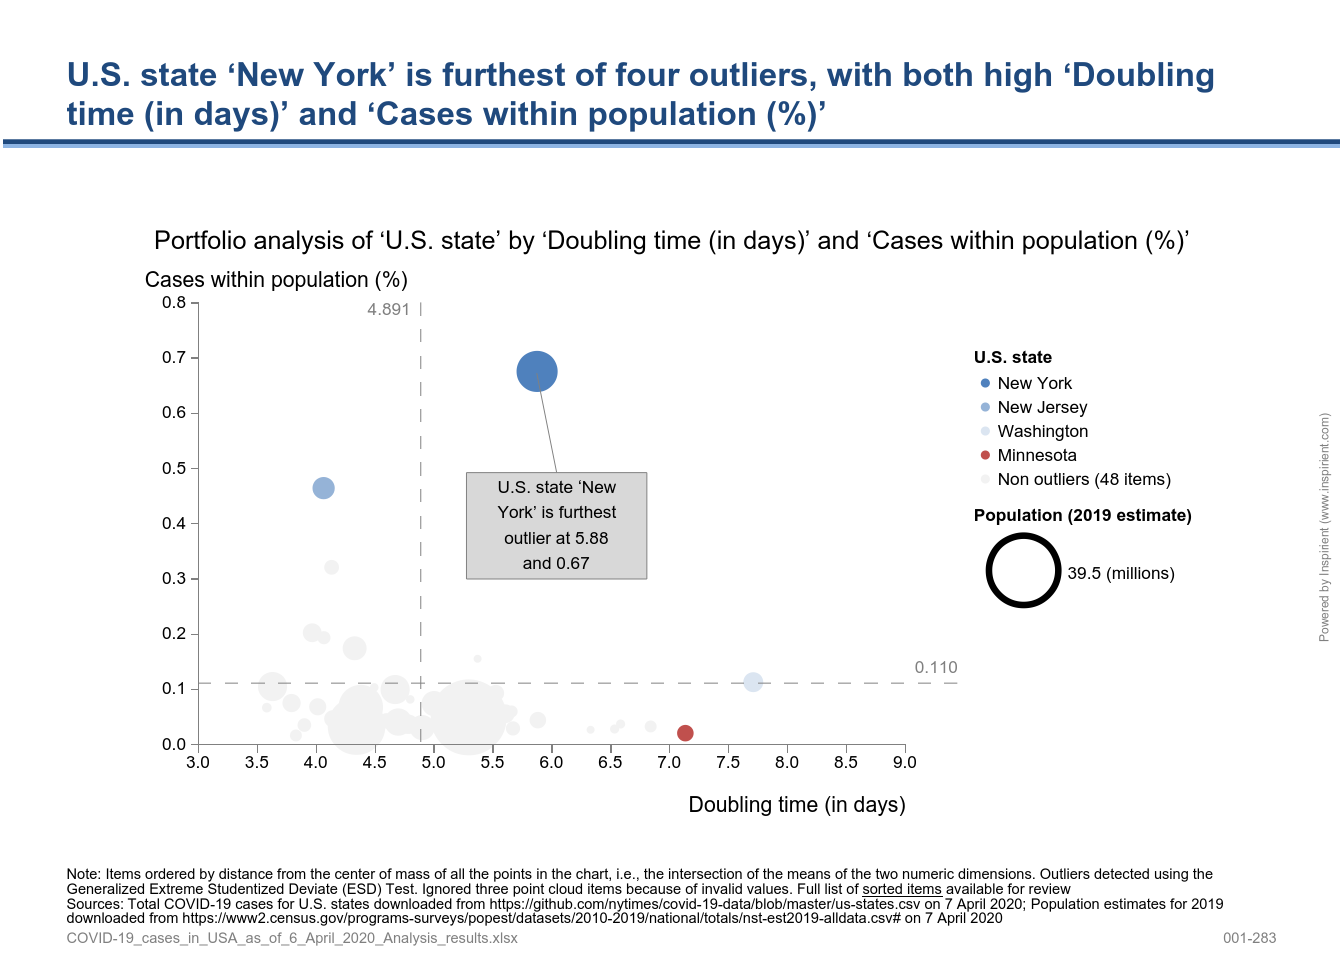 Portfolio analysis of ‘U.S. State’ by ‘Doubling time (in days)’ and ‘Cases within population (%)’